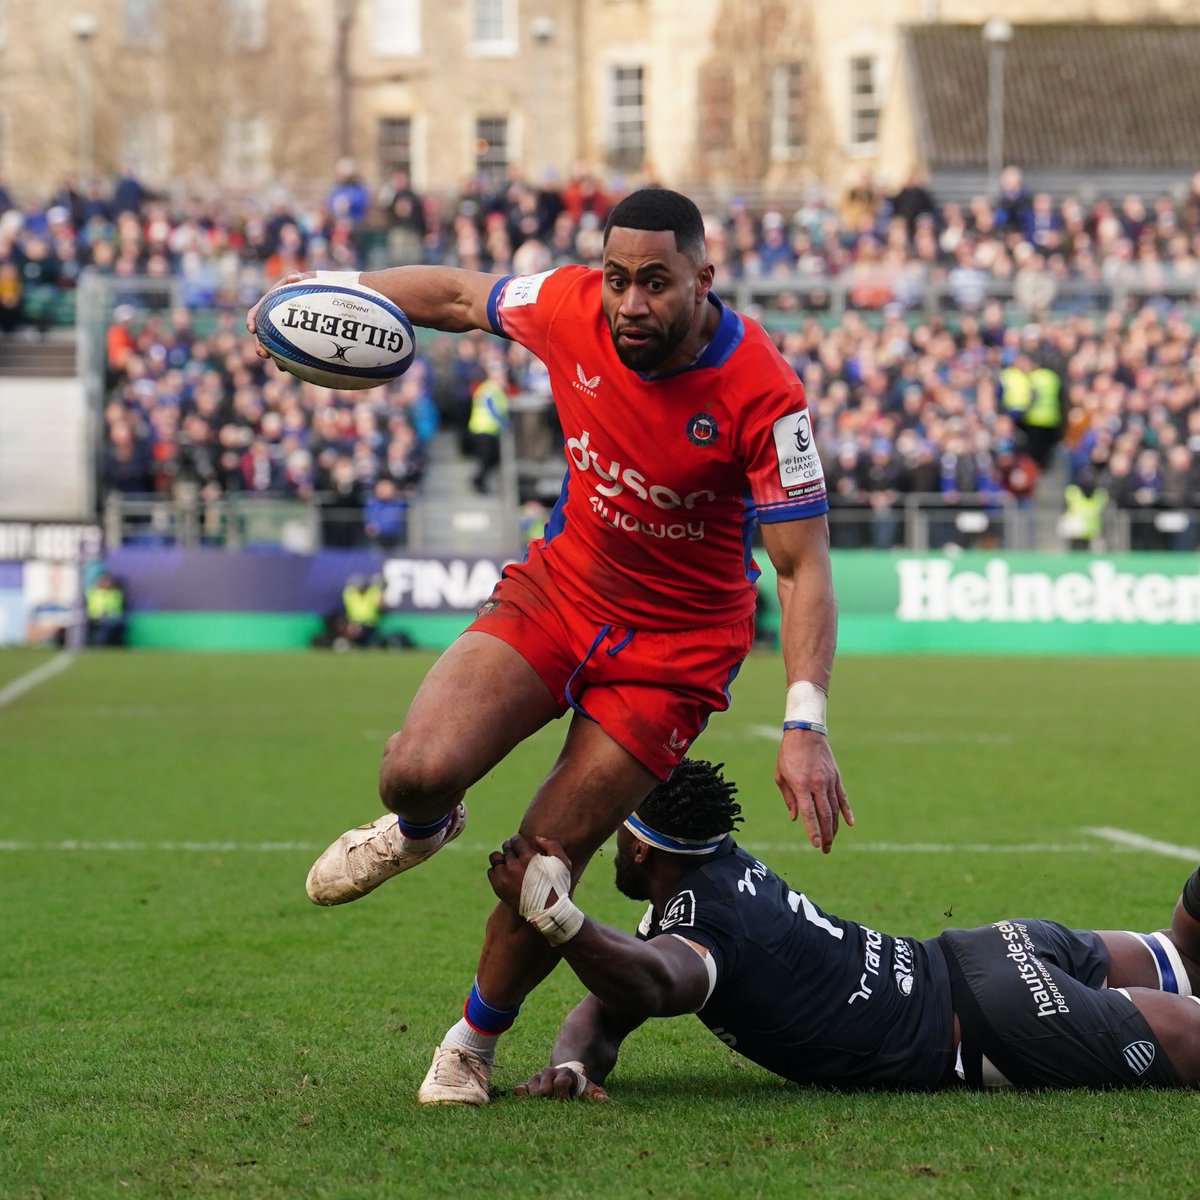 🚨 Joe Cokanasiga signs a new three-year deal with Bath! 🏉 Ten tries so far this season 🌹 13 tries from 16 caps 👀 #ITVRugby | @premrugby